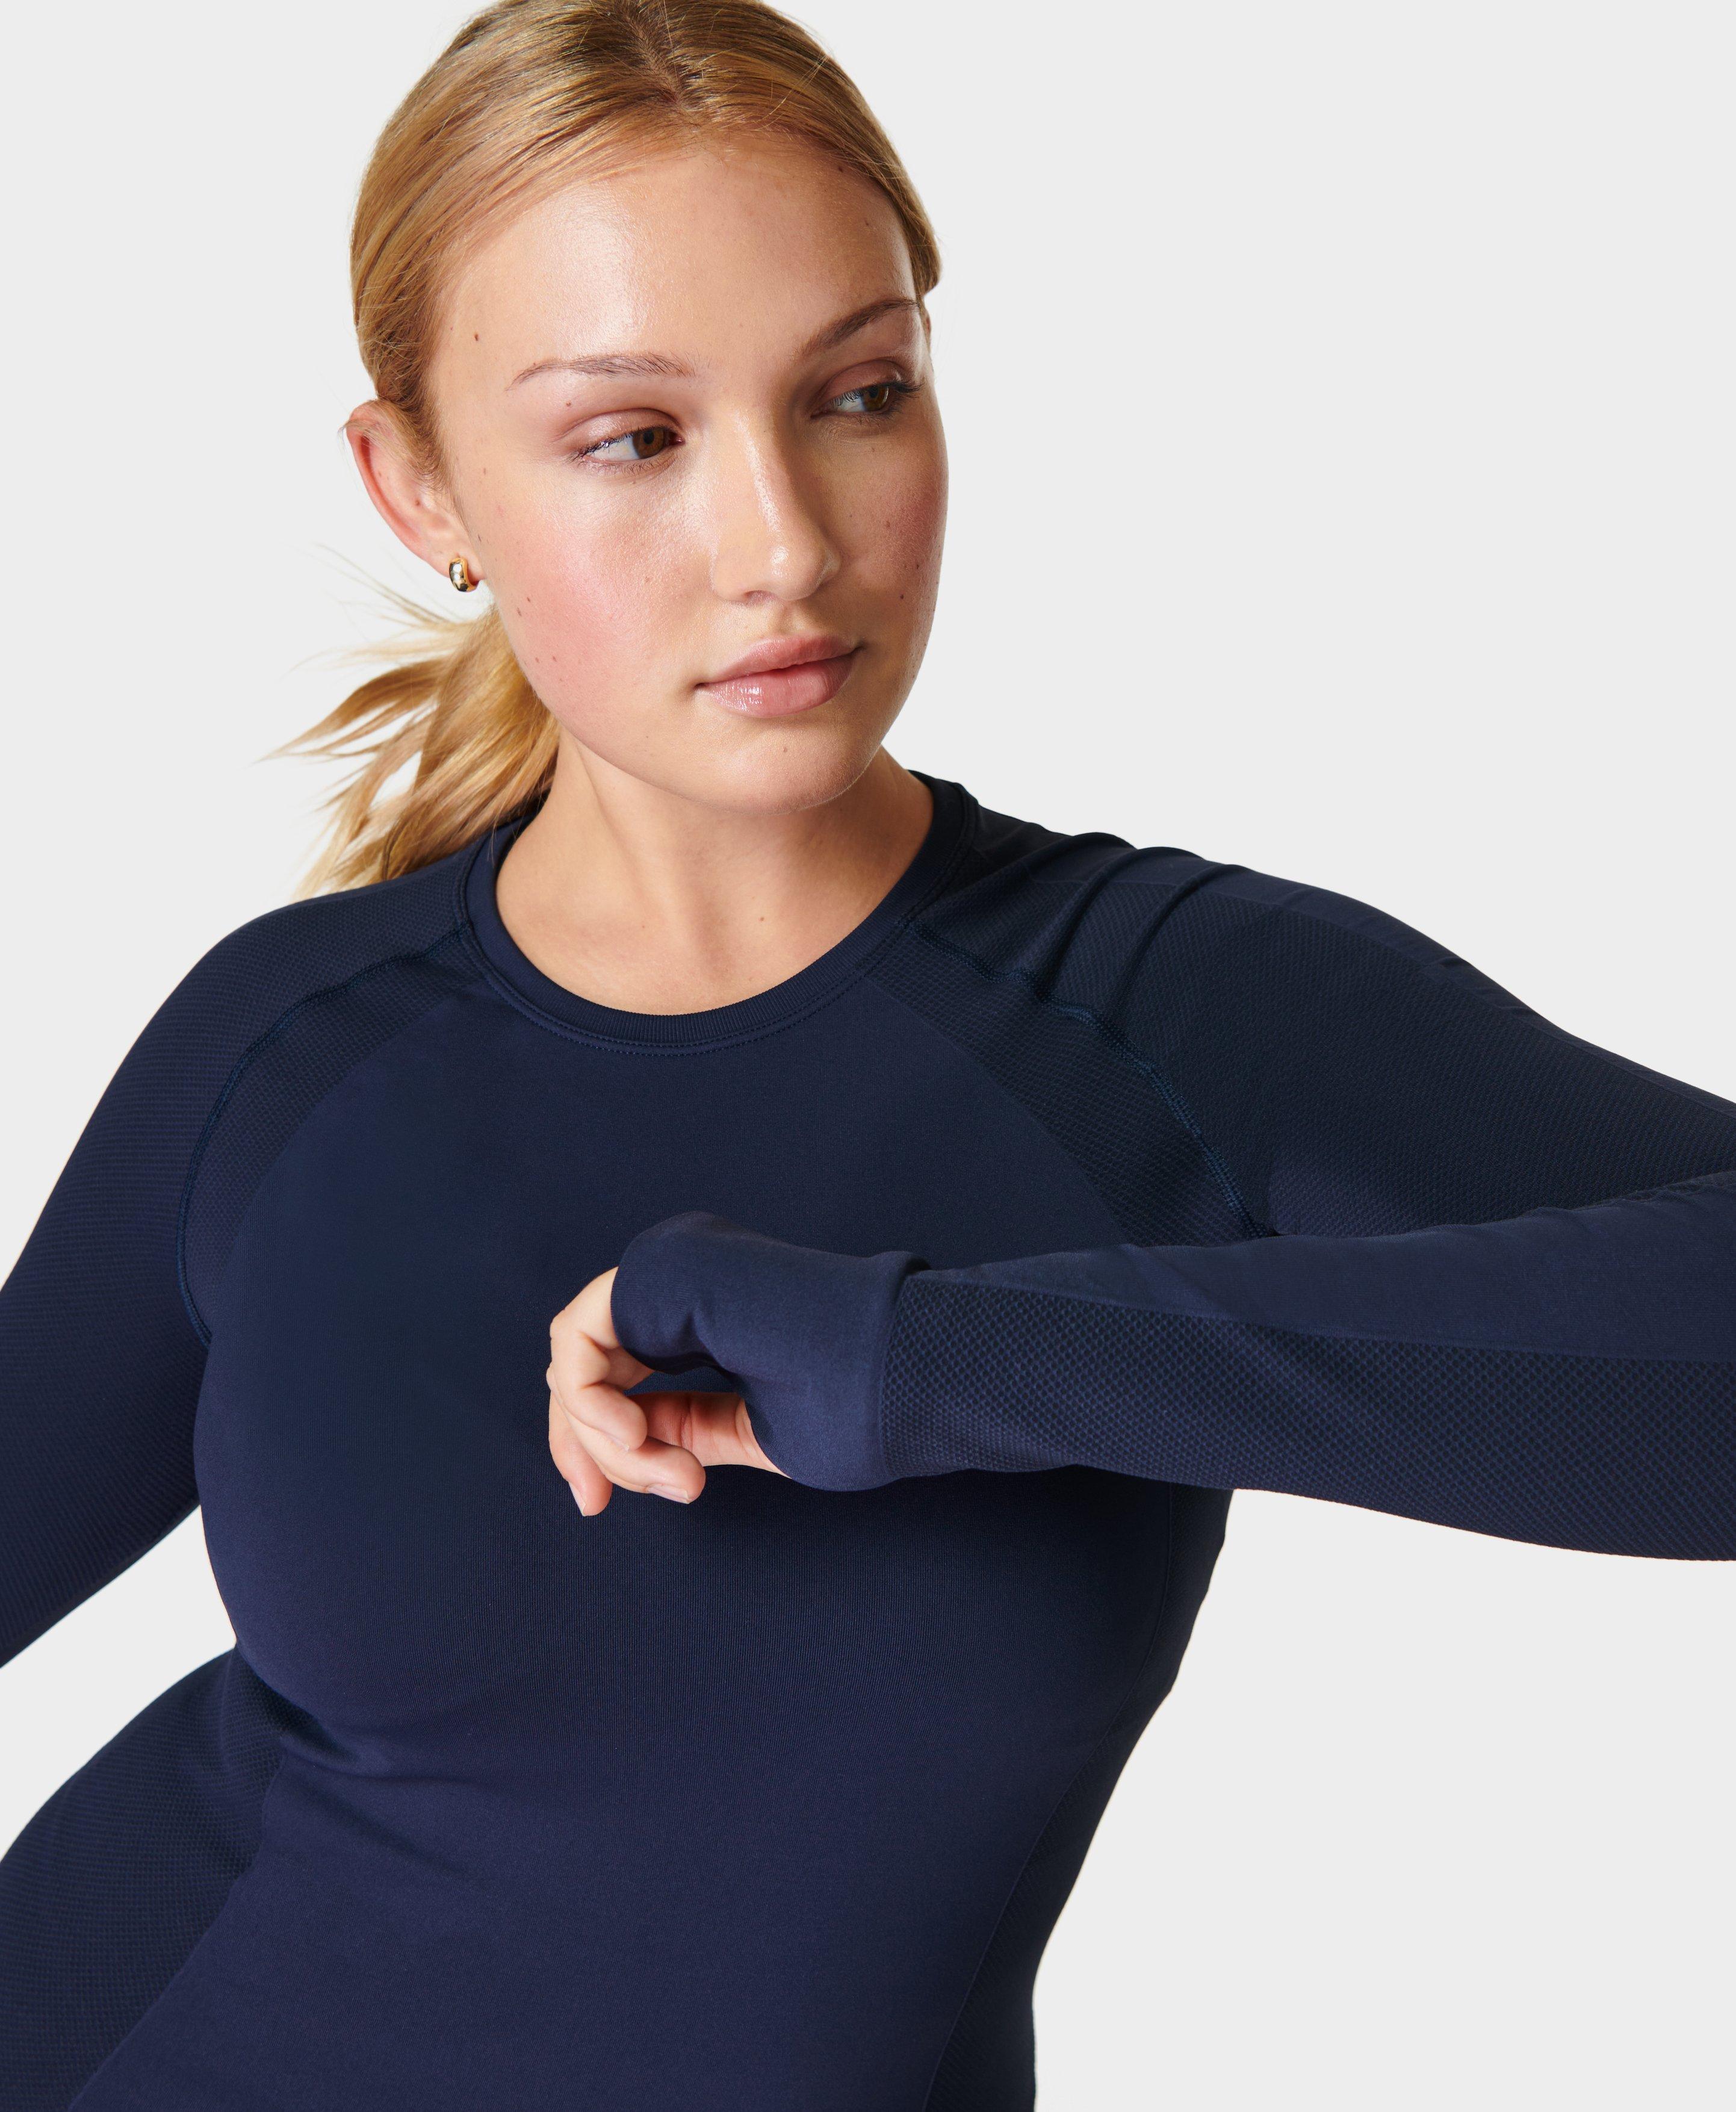 Athlete Seamless Workout Long Sleeve Top